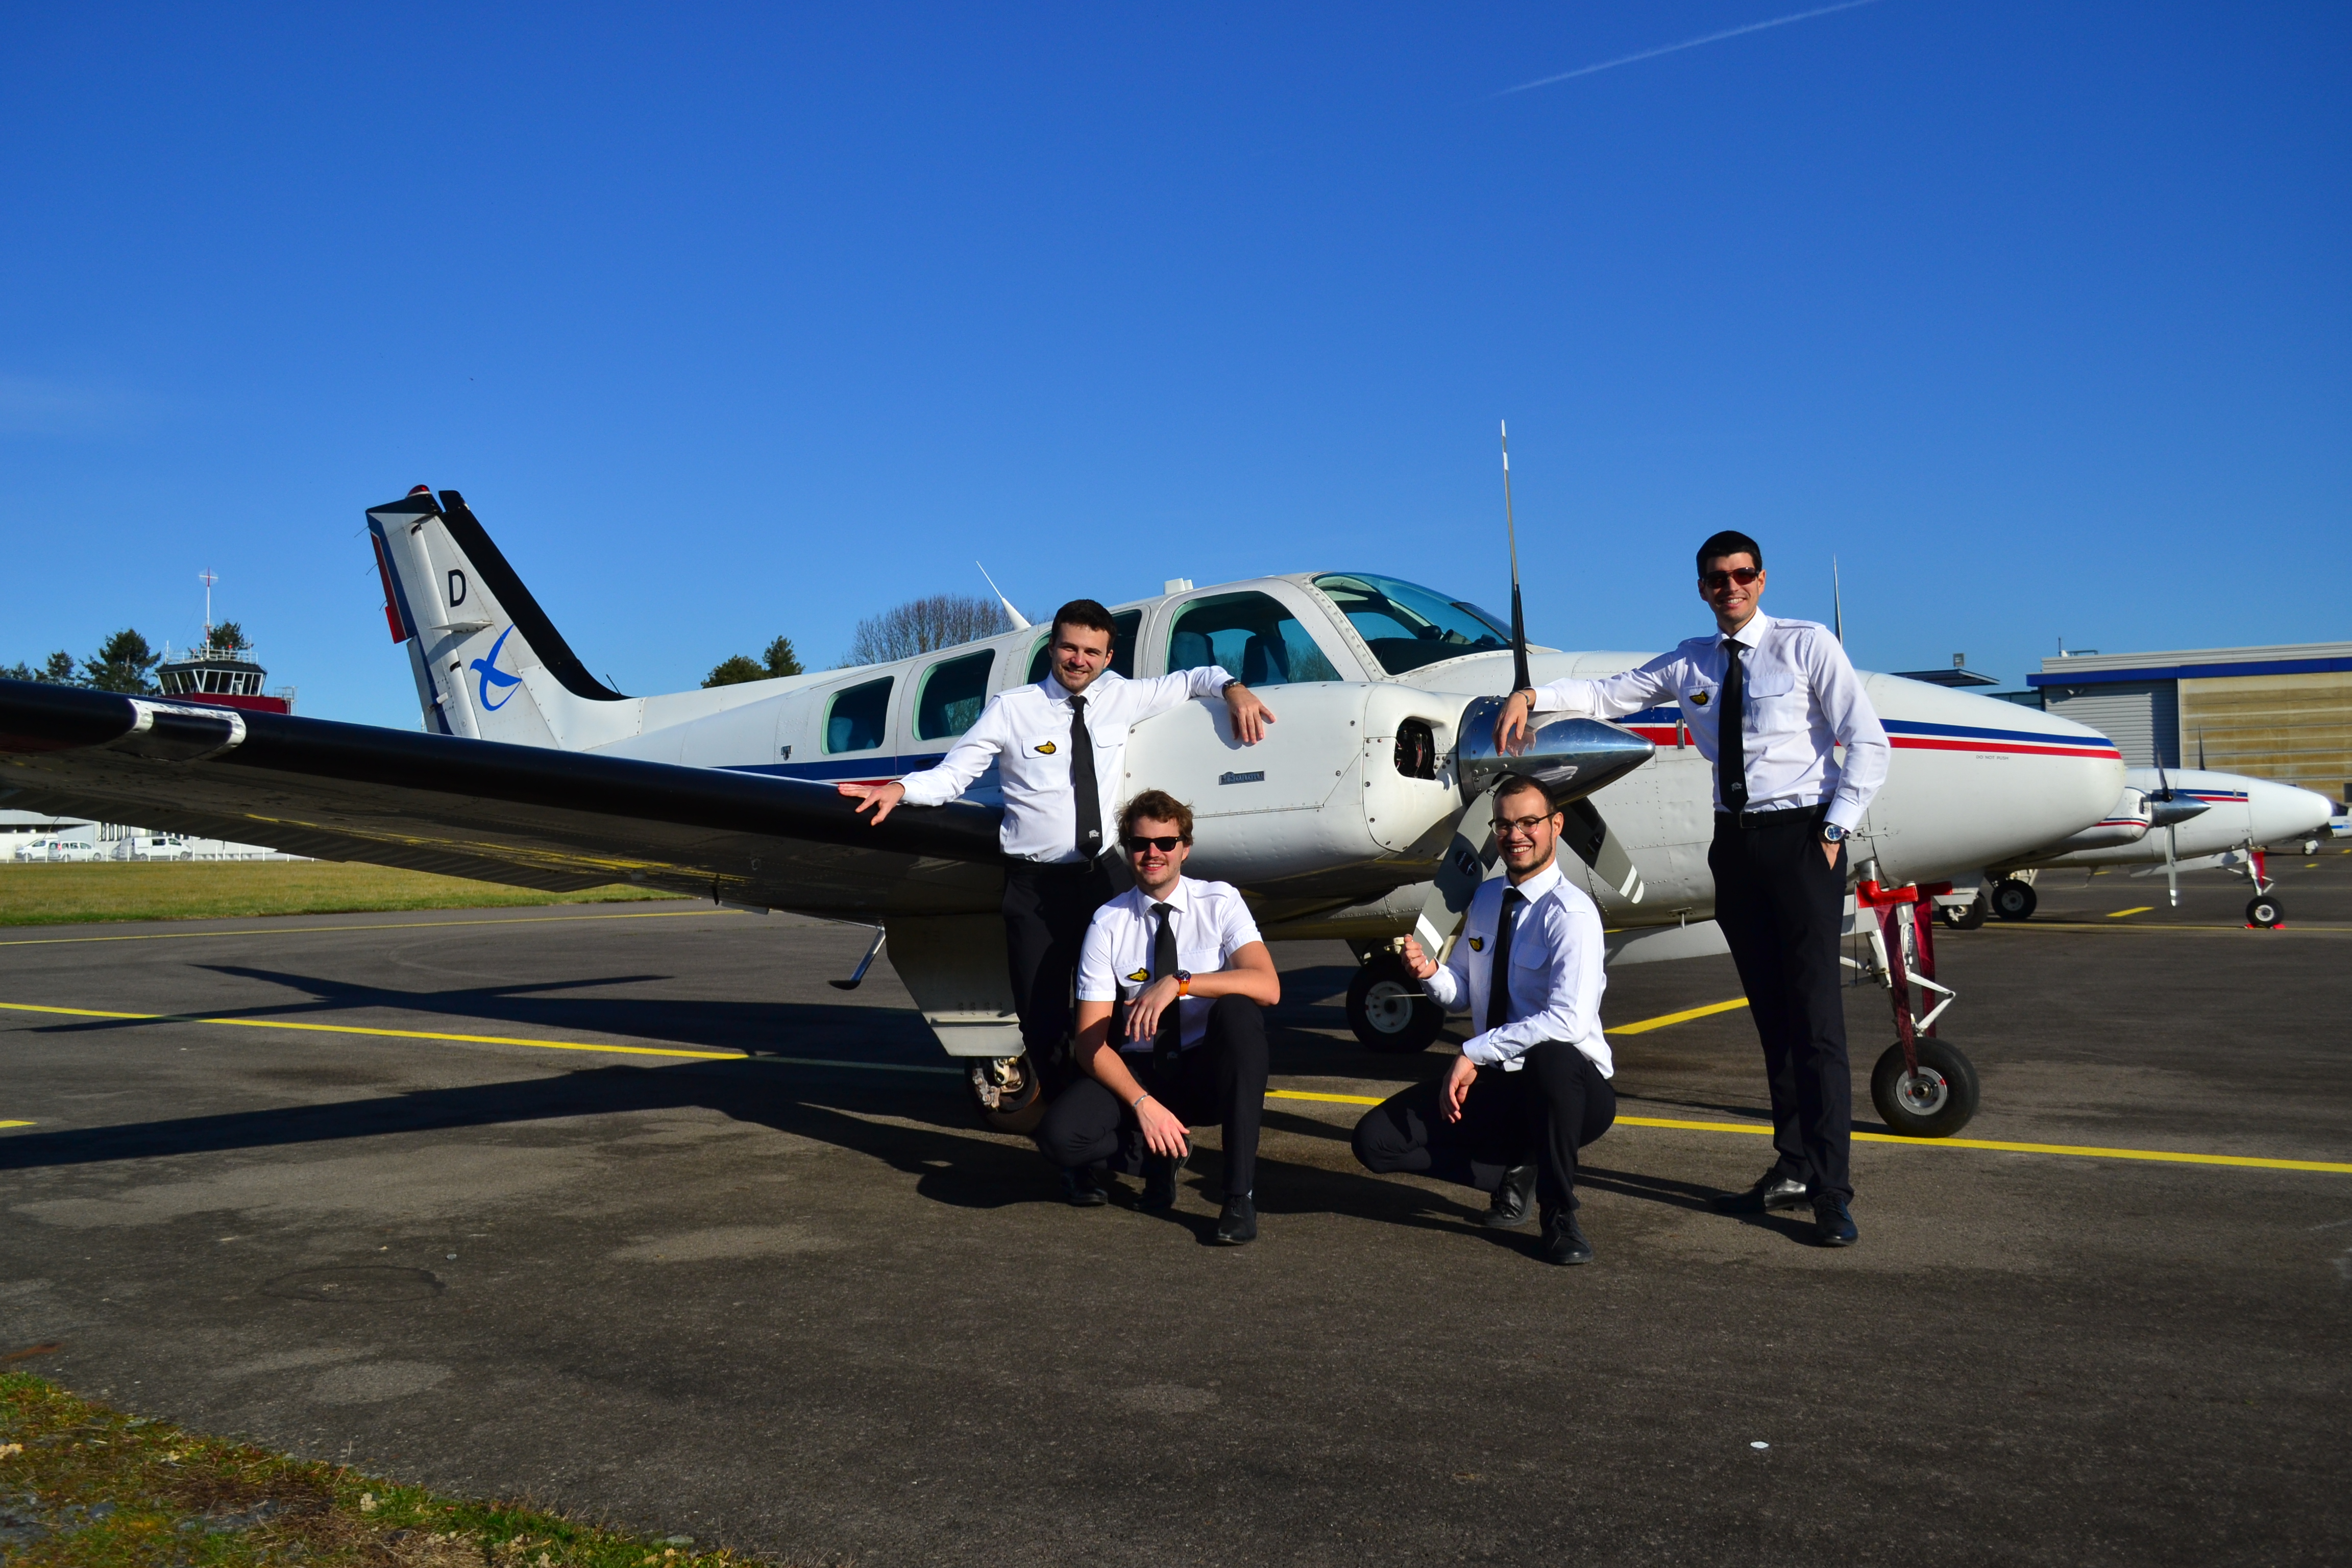 Four EPLs posing in front of a Beechcraft Baron 58 aircraft